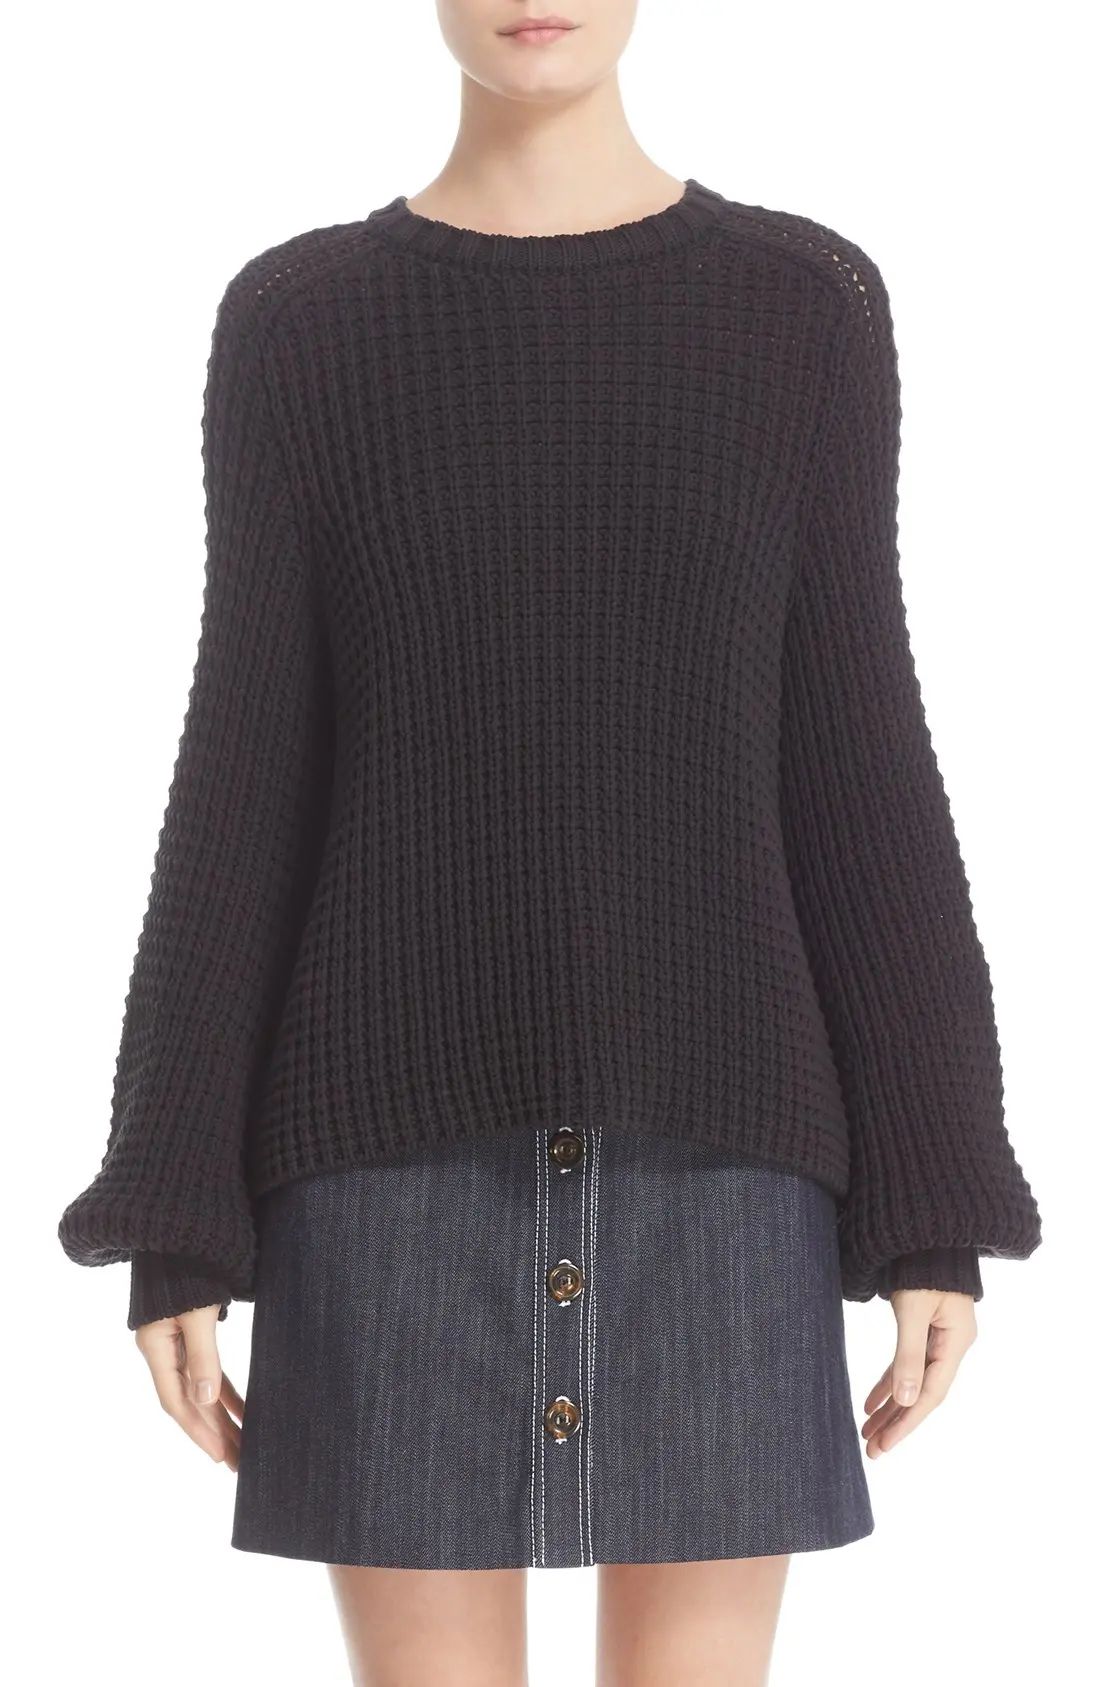 Cotton Blend Knit Sweater | Nordstrom